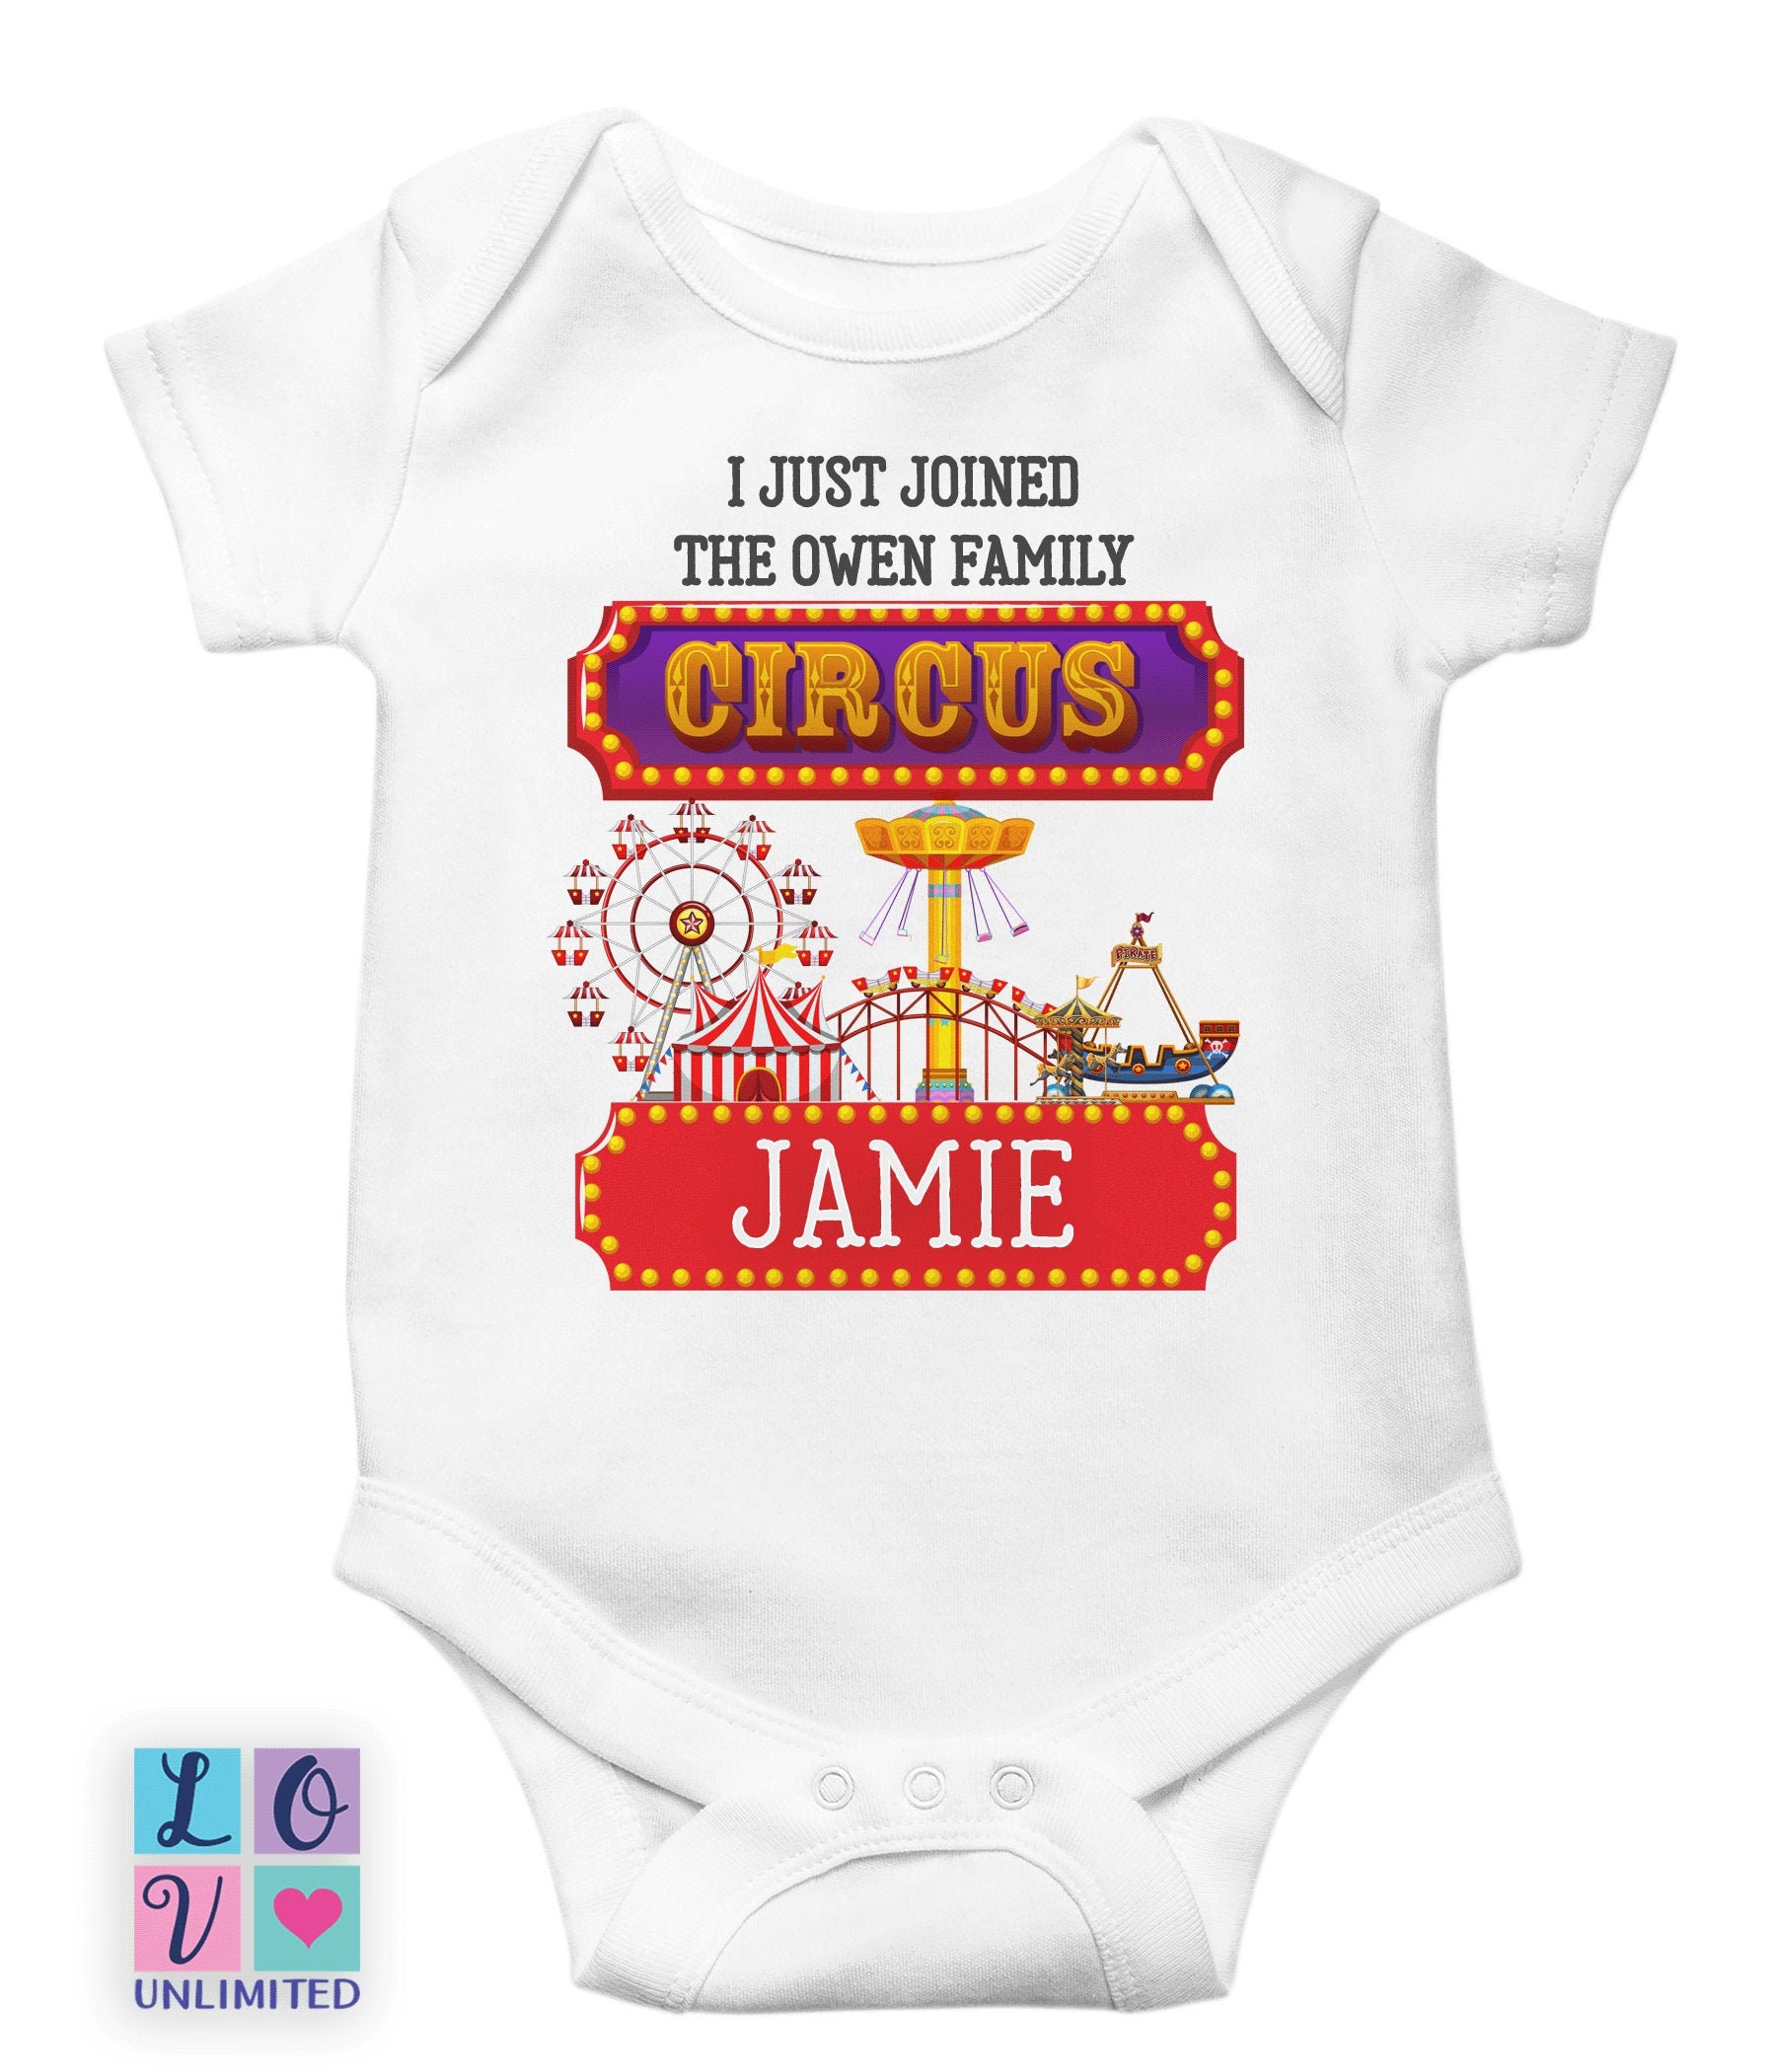 Personalized circus baby bodysuit, Funny gag gift for baby shower, Joined  family circus baby clothes